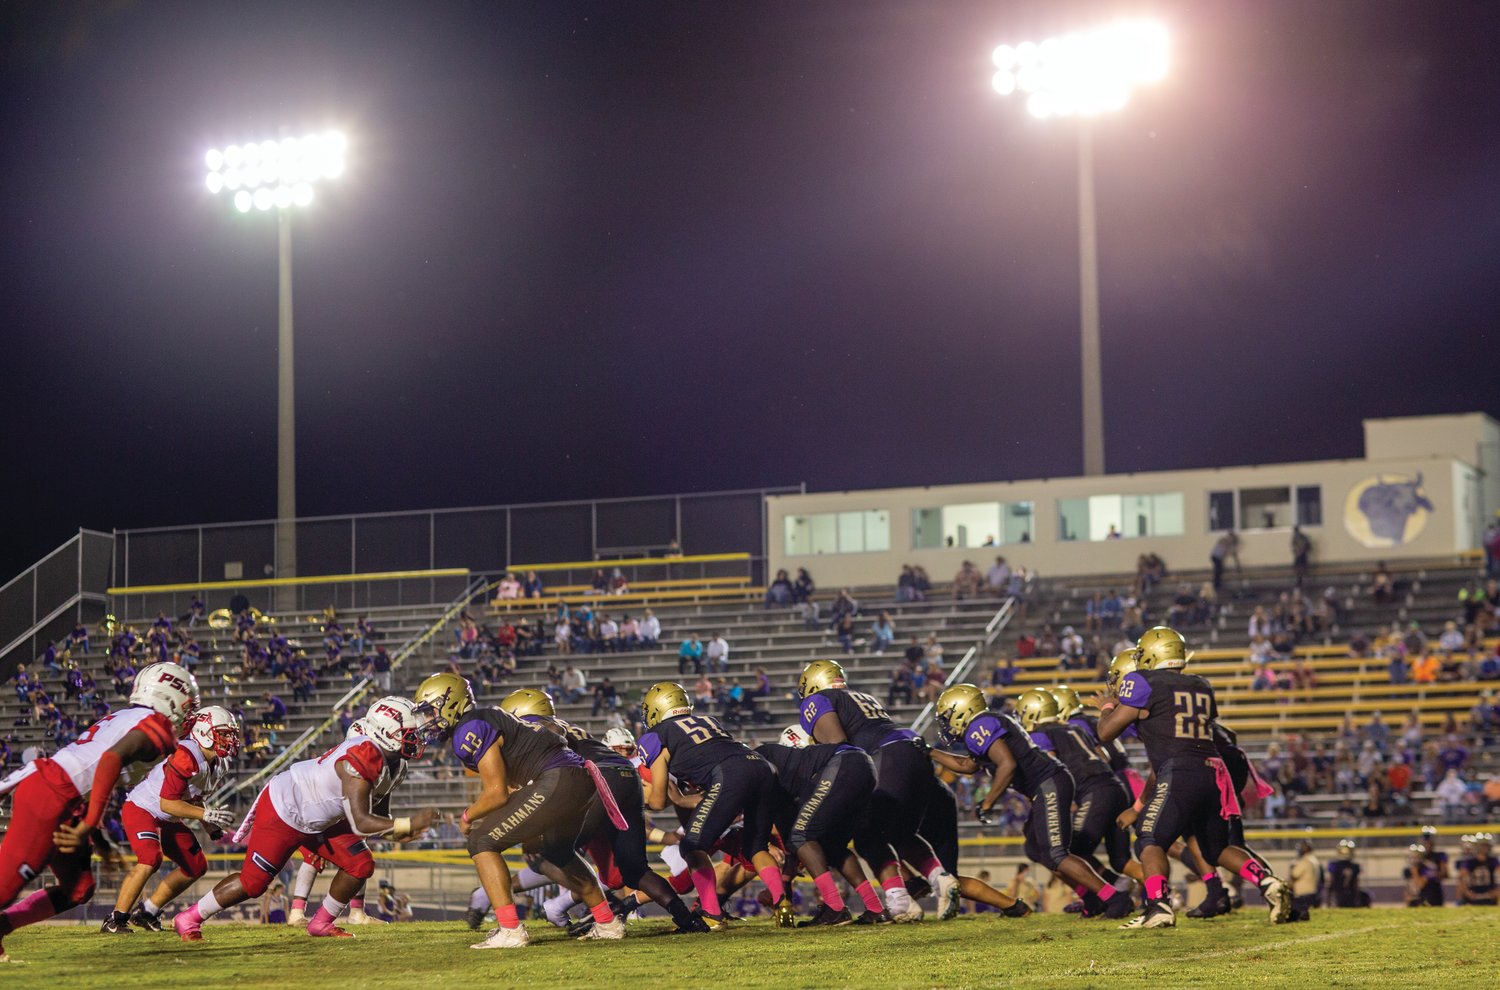 The Okeechobee Brahmans were able to take care of business in the second half of their game against PSL.